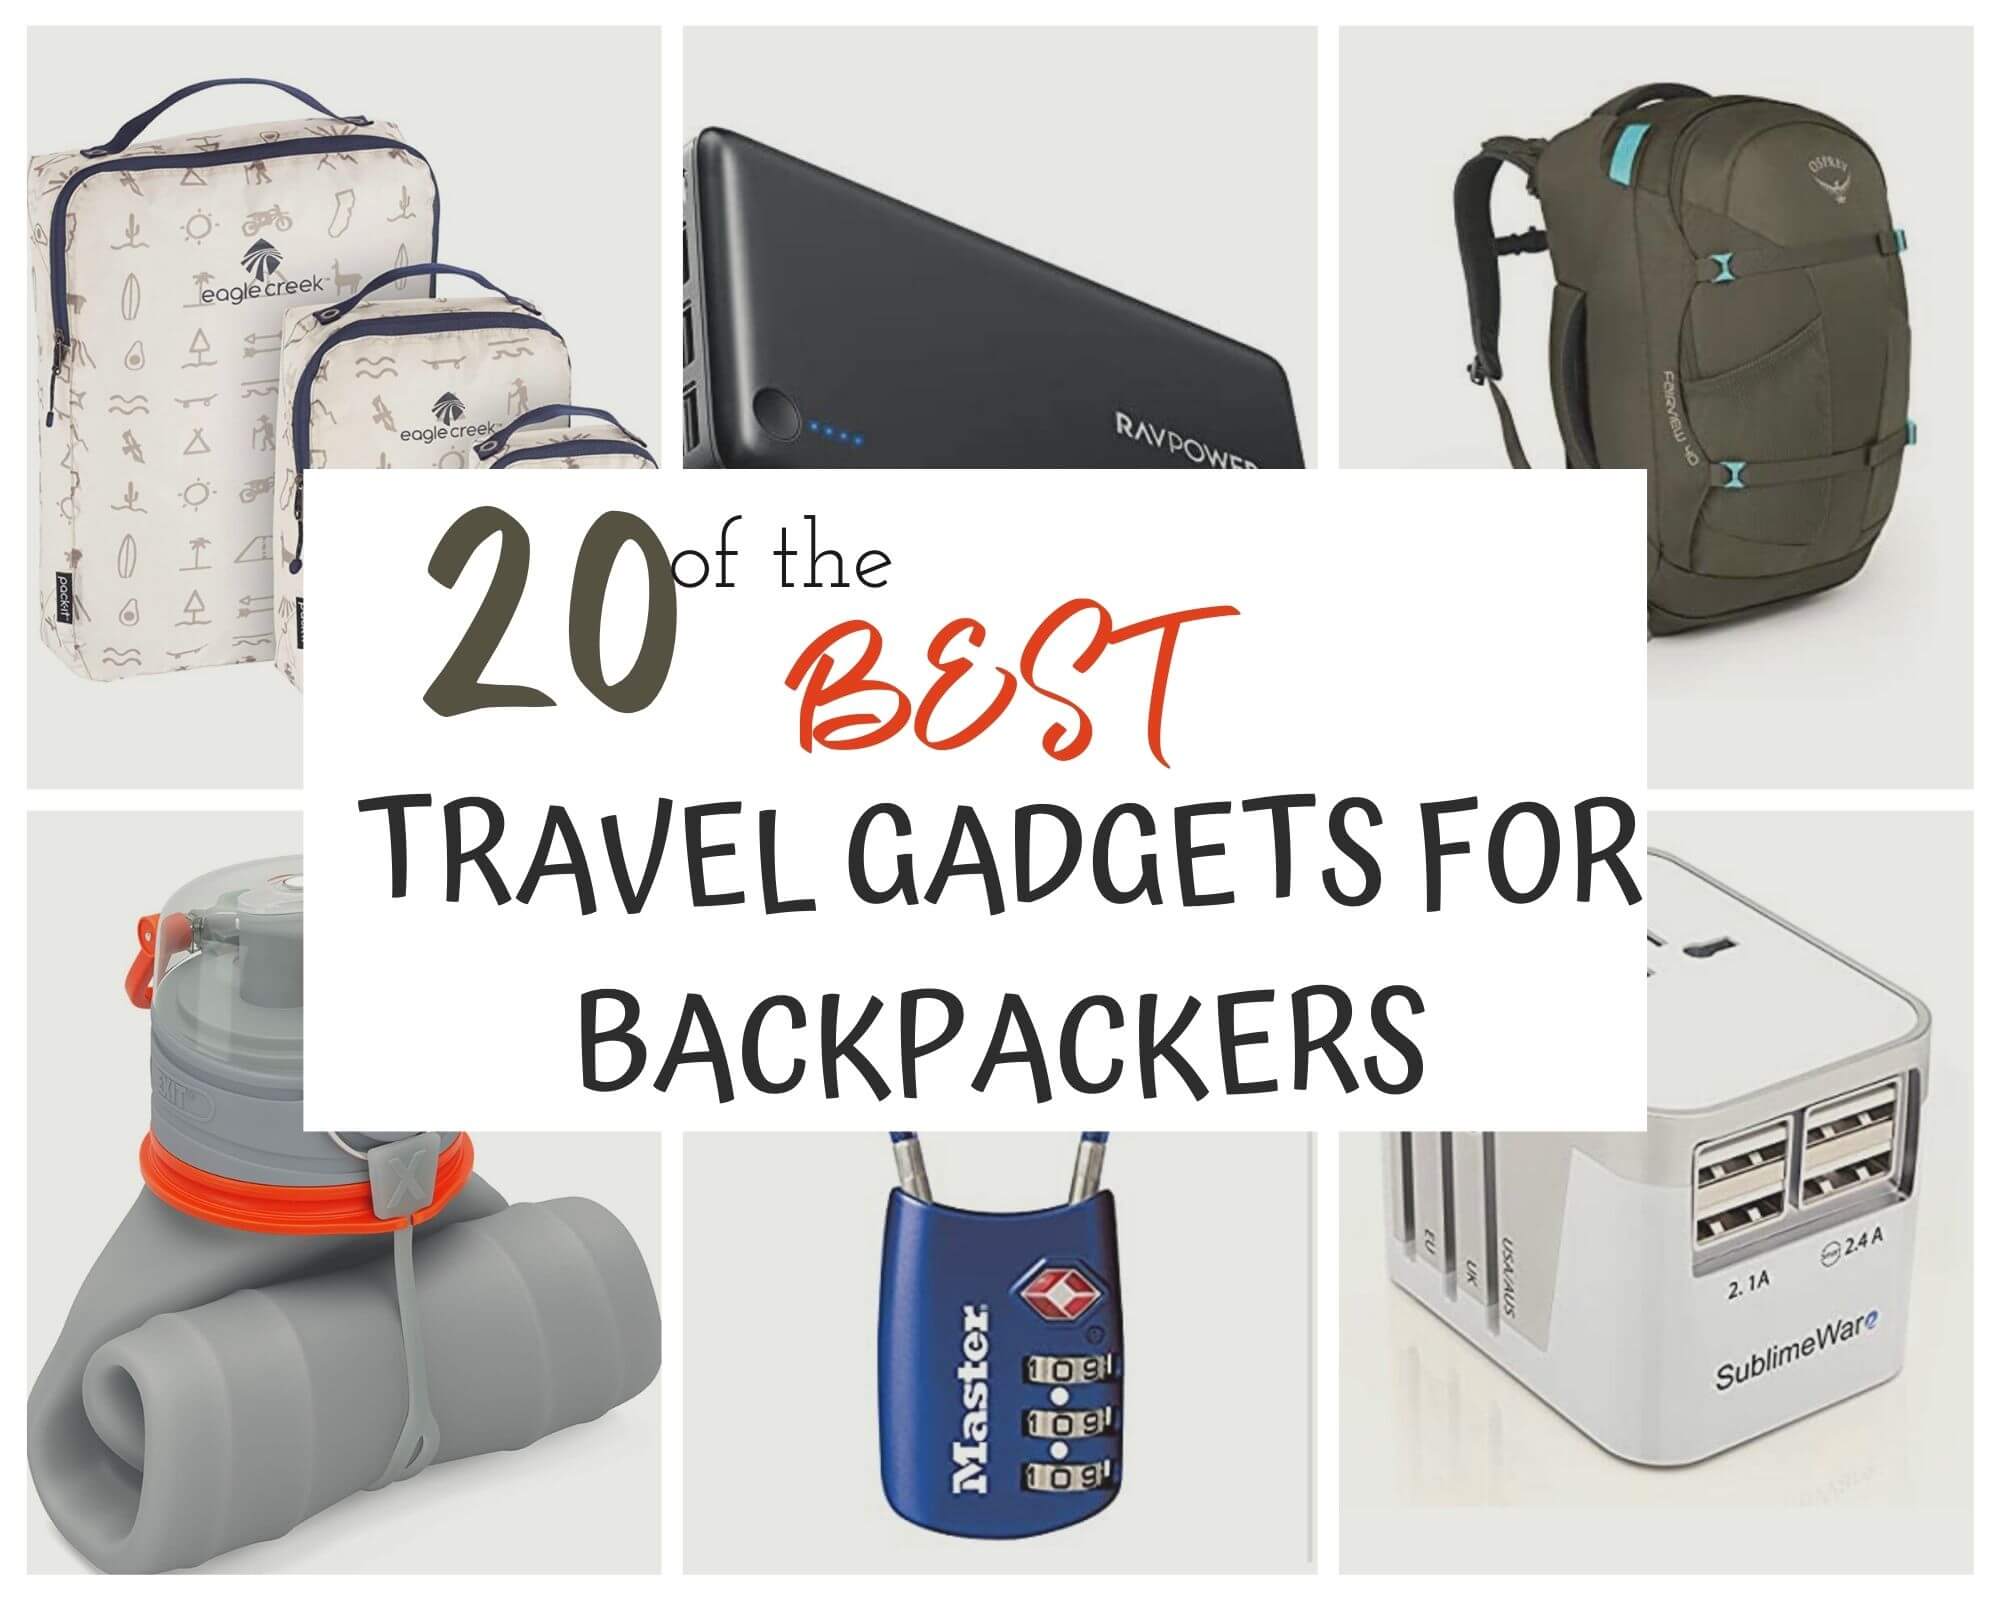 Best travel gadgets for backpackers 